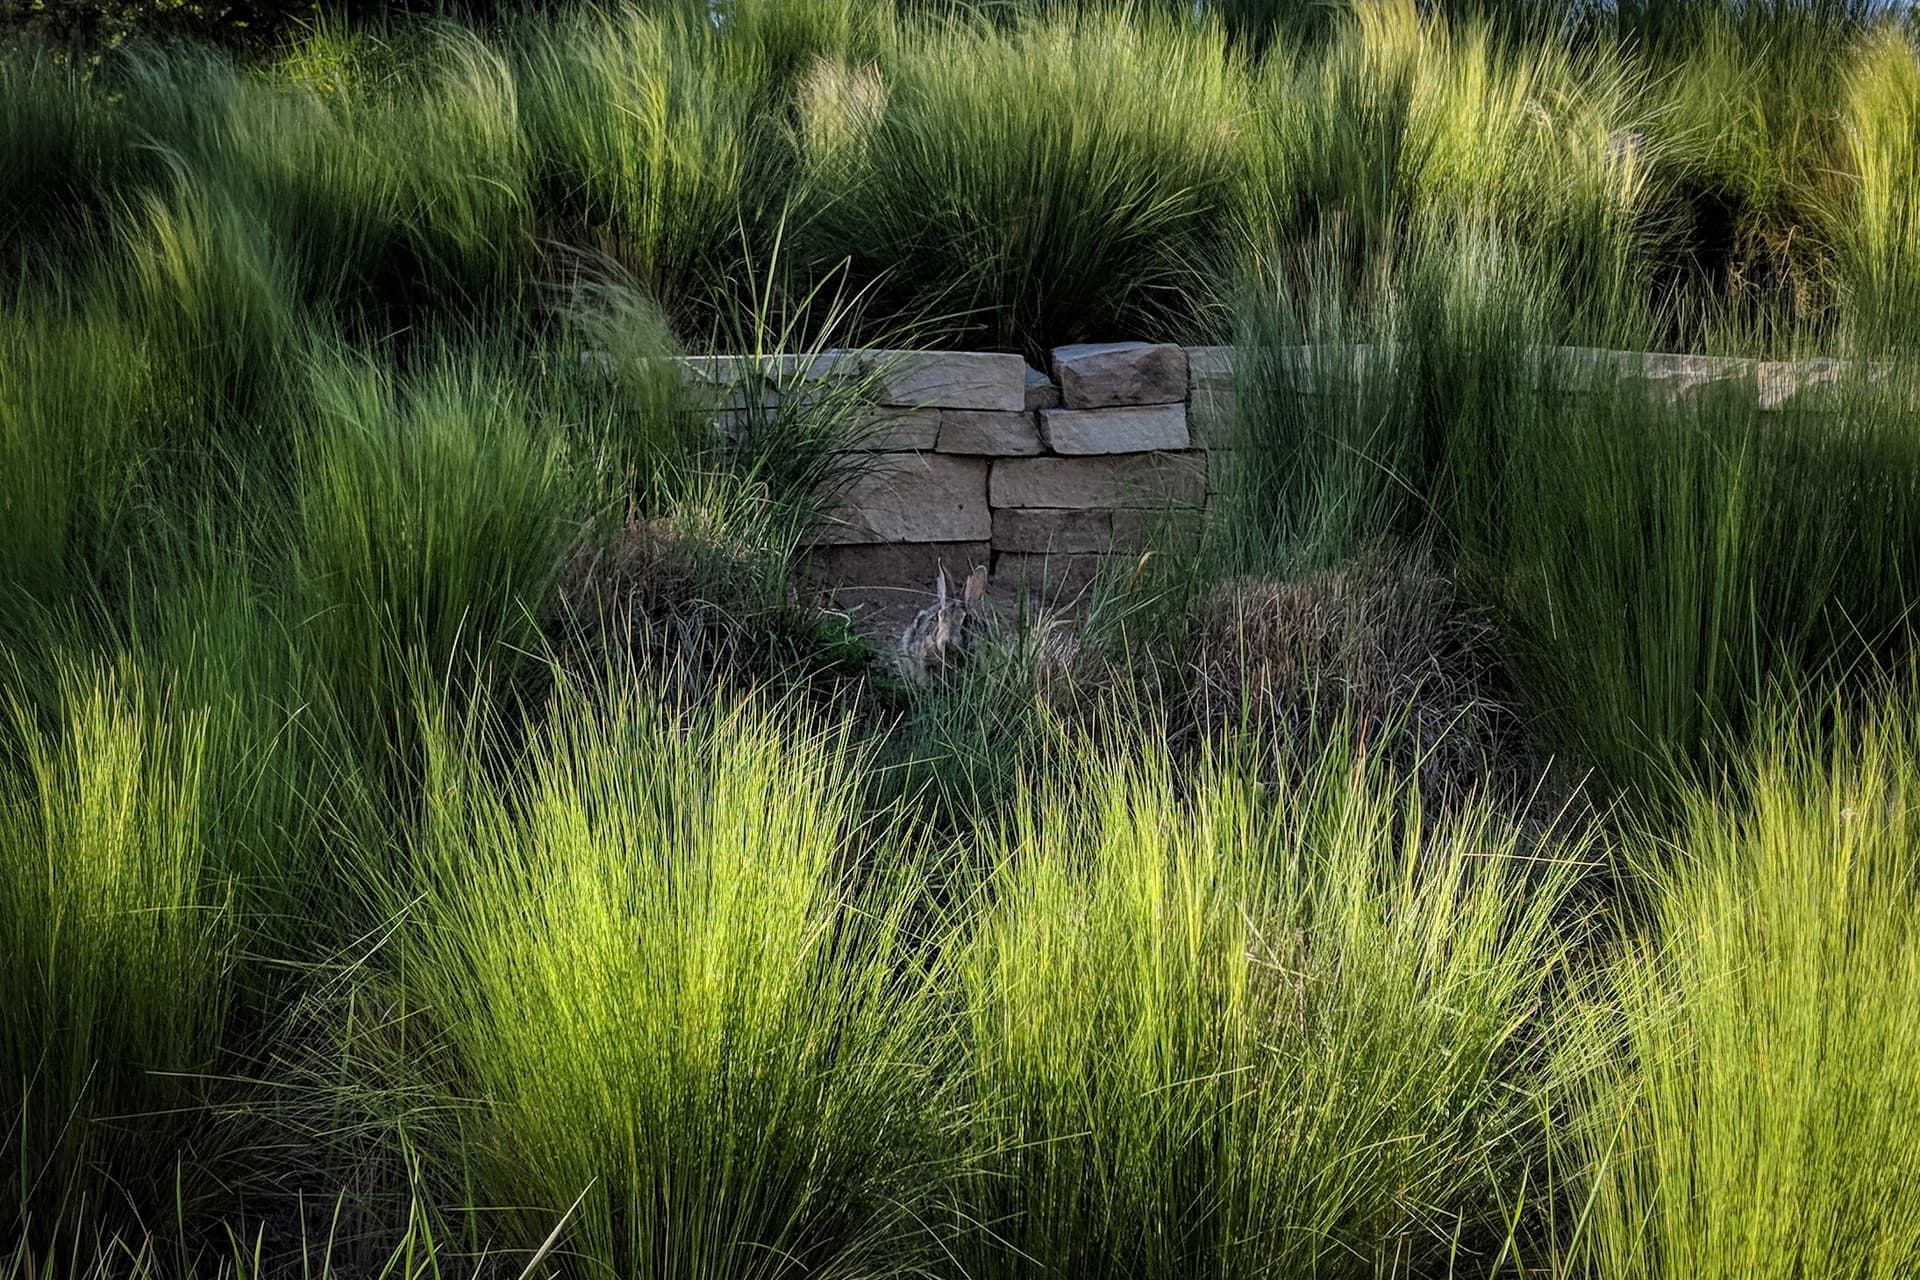 A rabbit sitting in front of a low stone wall, almost hidden in the tall grass.